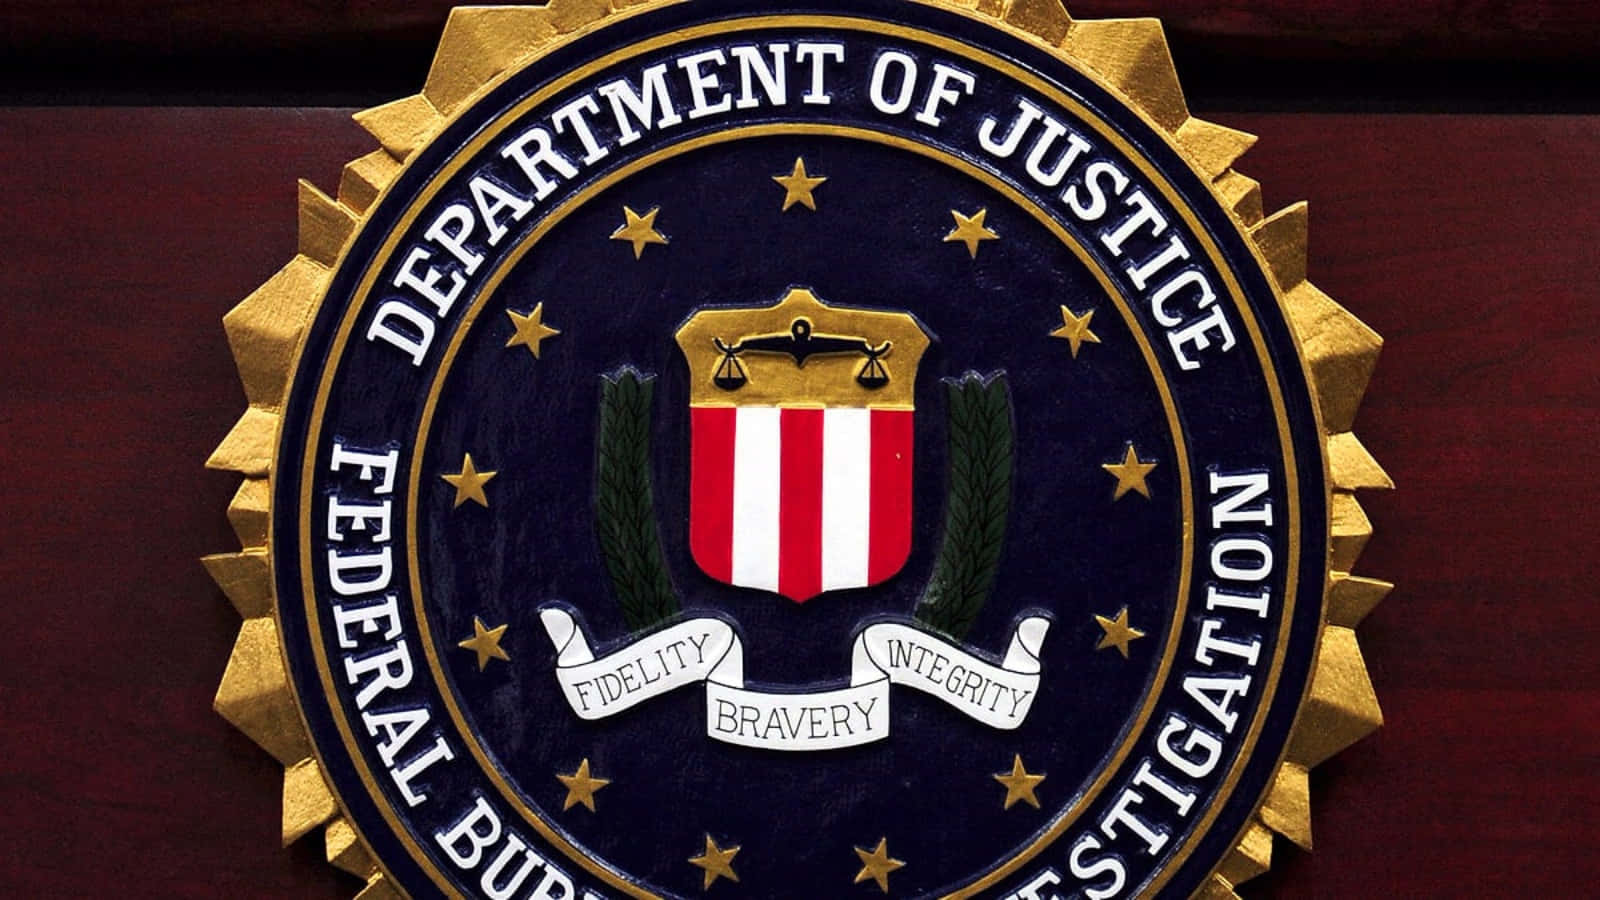 The Fbi Logo Is Shown On A Wall